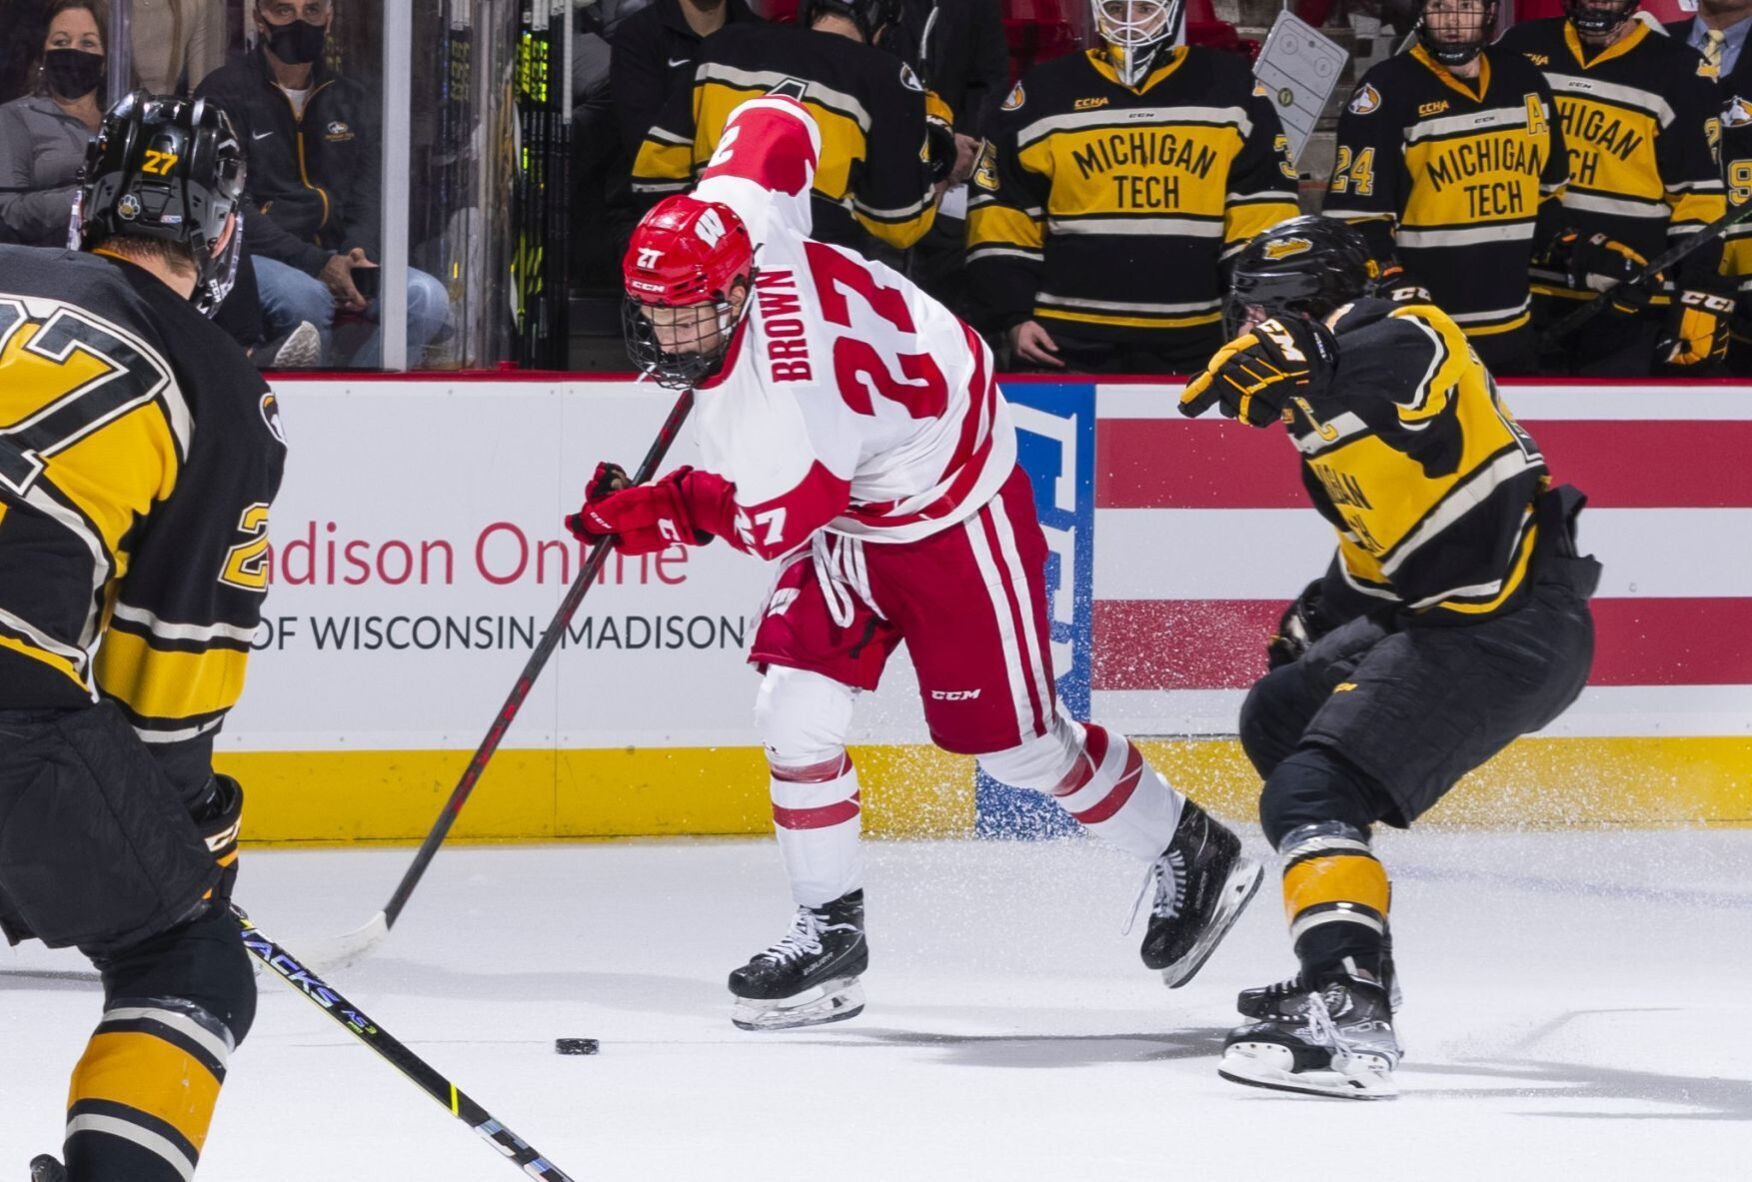 These 5 Badgers players or recruits were projected as 2022 NHL draft picks image